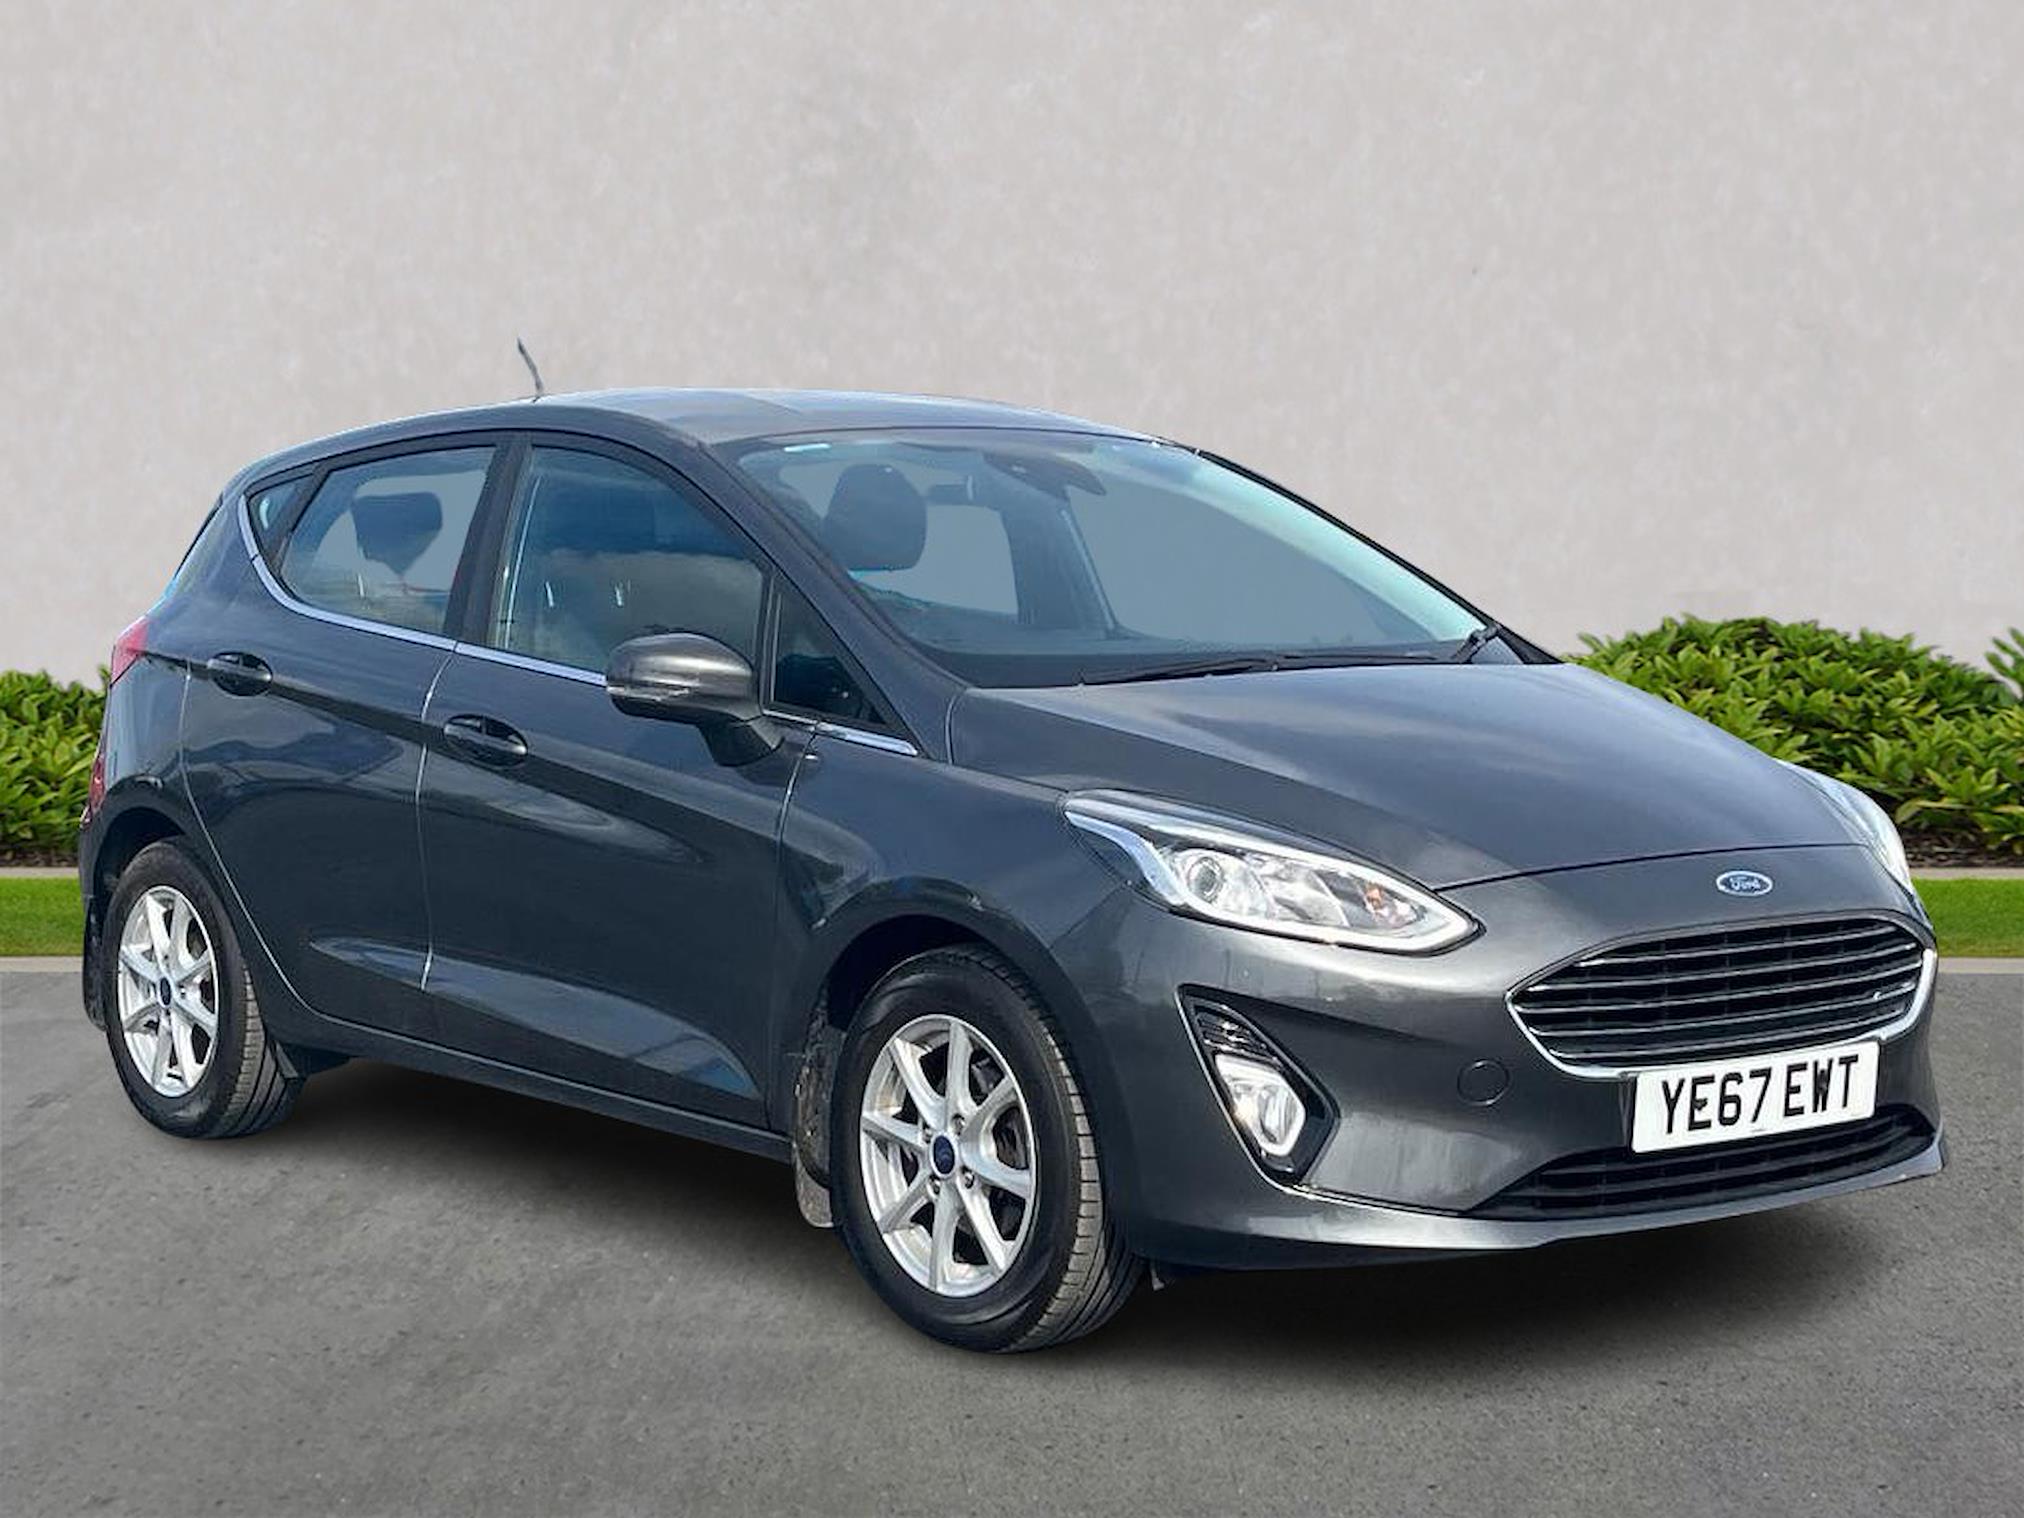 Used FORD FIESTA 1.0 Ecoboost Zetec 5Dr 2017